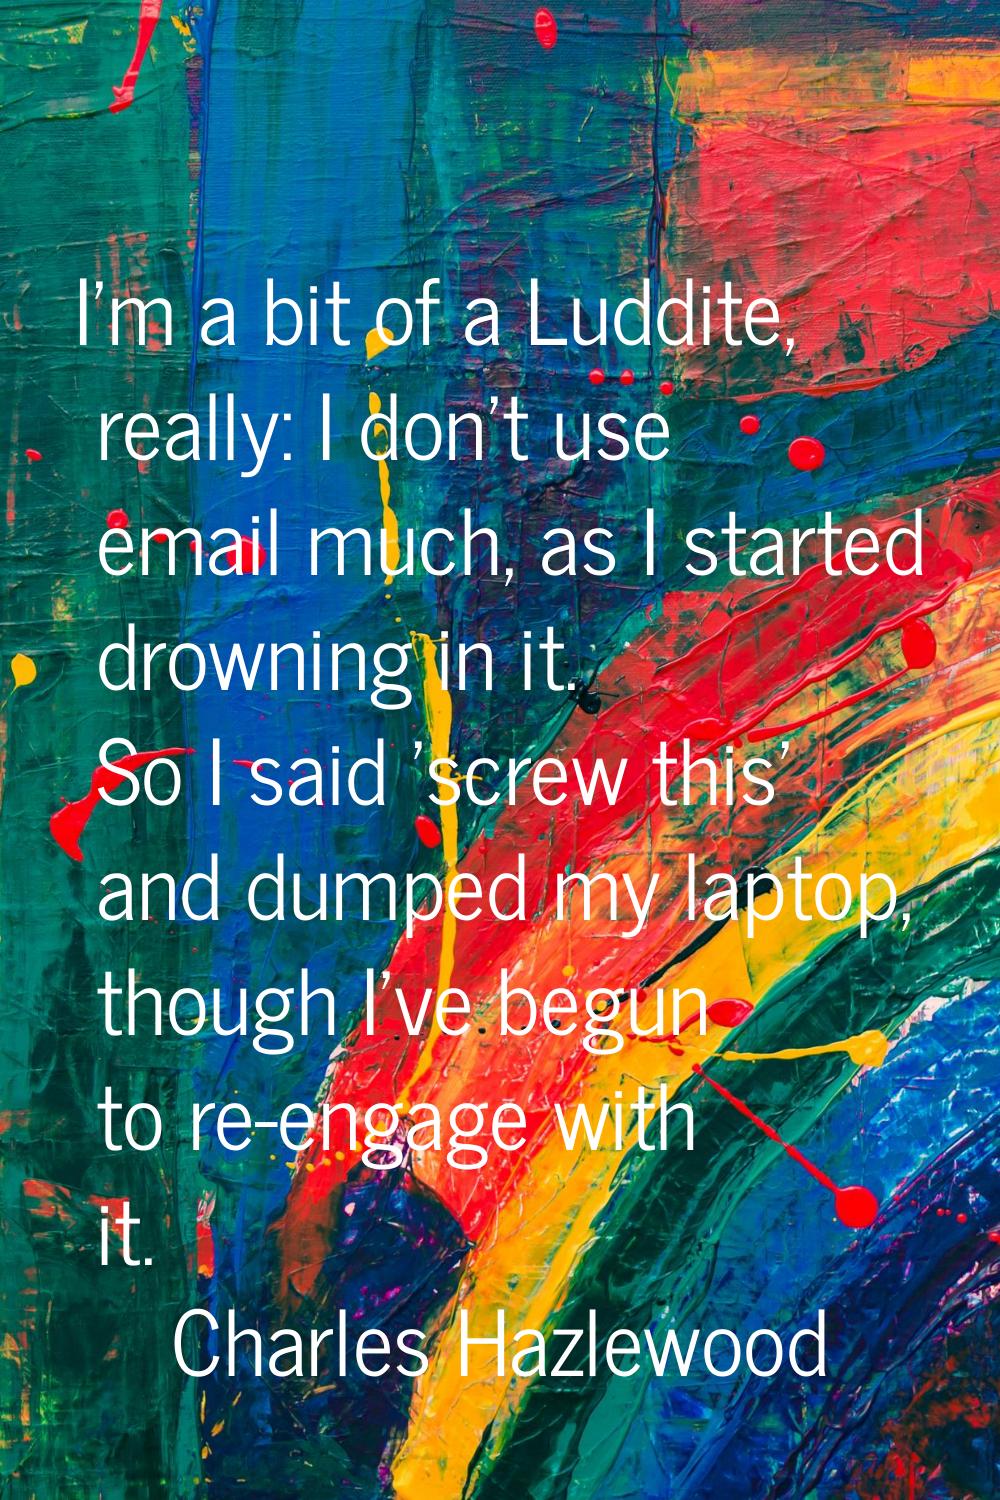 I'm a bit of a Luddite, really: I don't use email much, as I started drowning in it. So I said 'scr